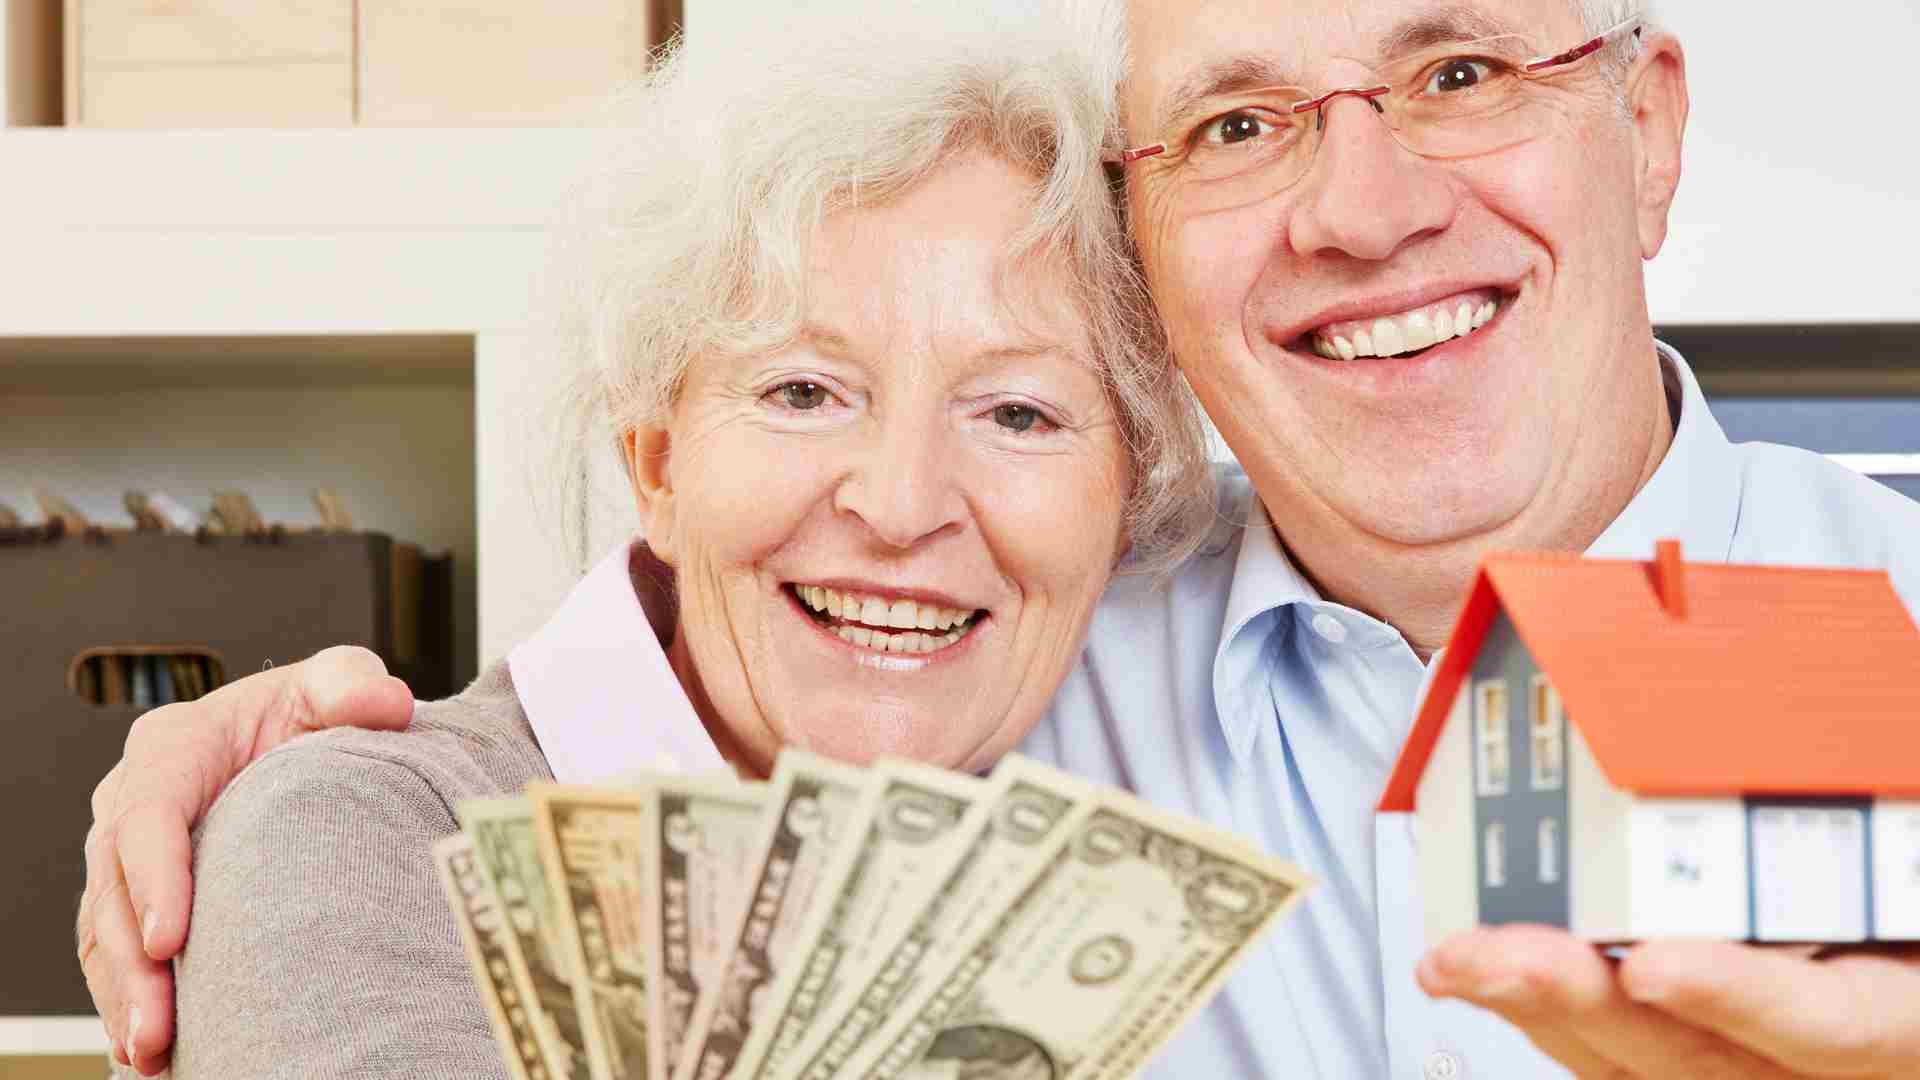 Social Security retirement benefits can provide you with a really large payment if you plan retirement carefully